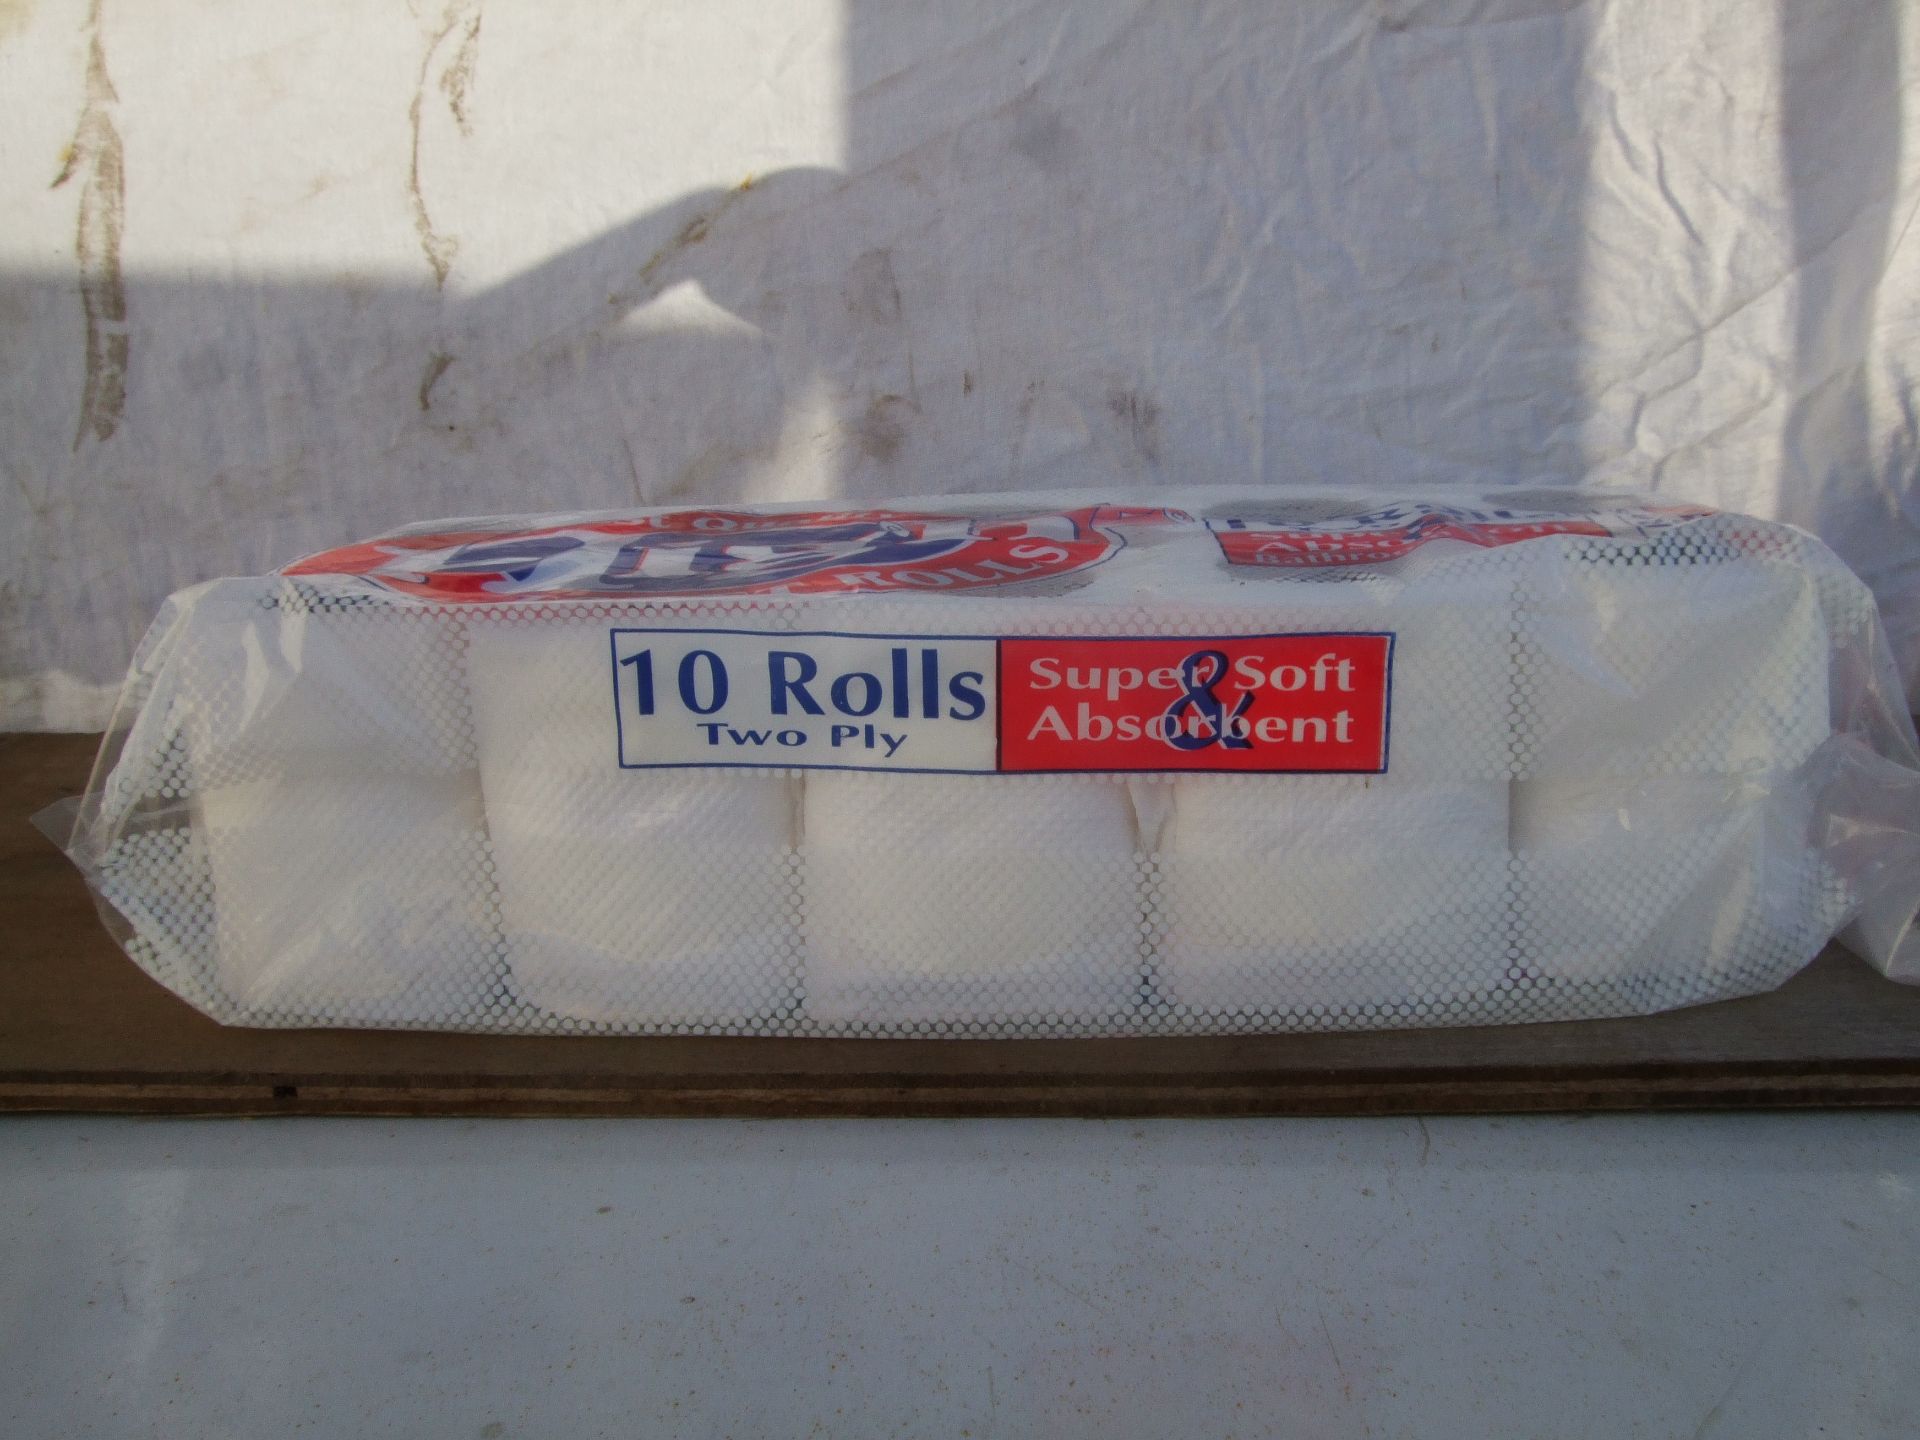 1 pallet consisting of -  2,000 rolls of toilet paper 2 Ply super soft and absorbent toilet